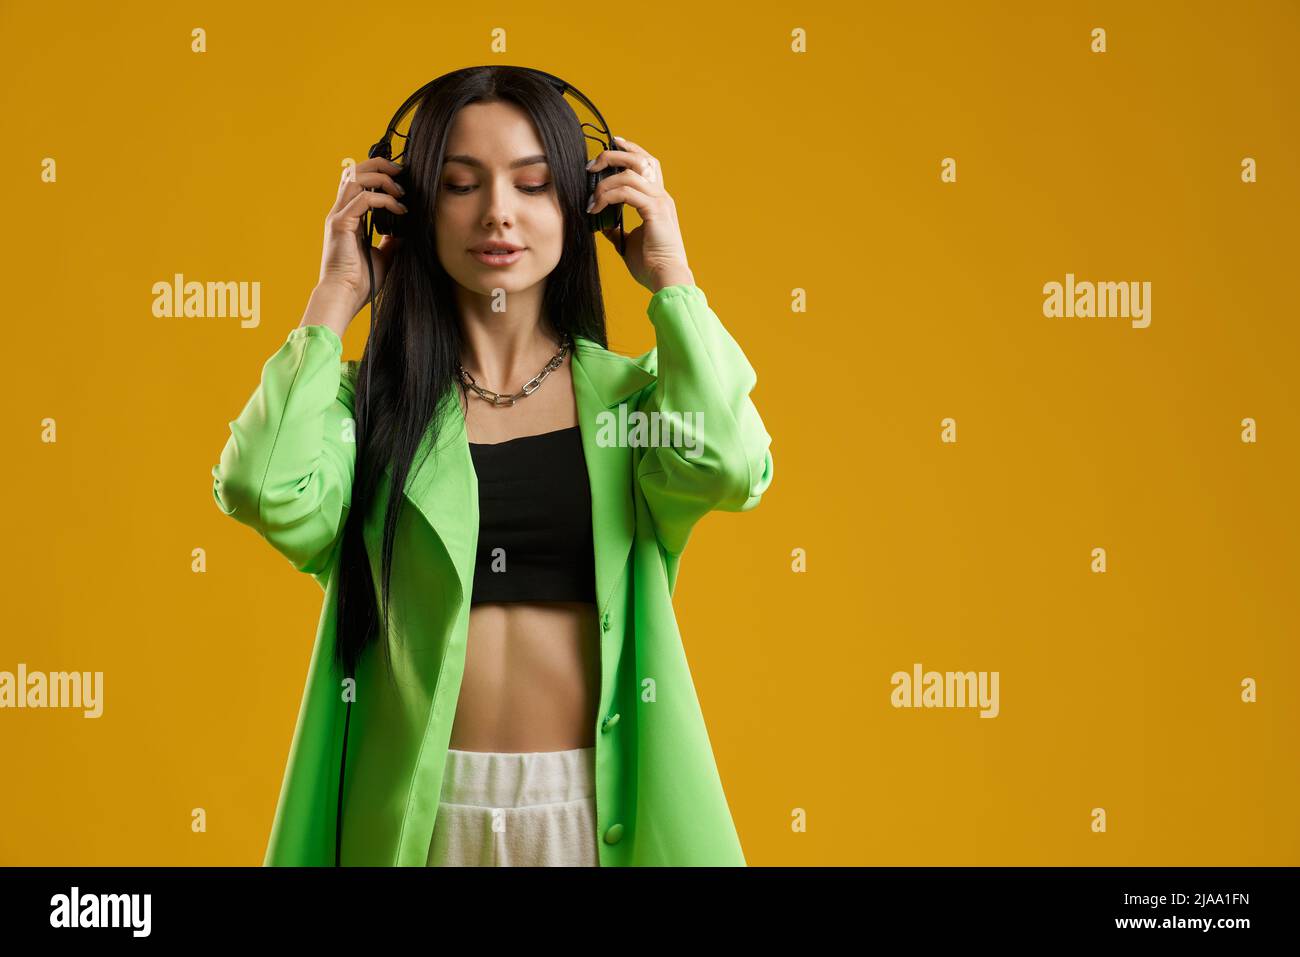 Mindful female in stylish jacket and crop top wearinging headphones on head outdoor. Portrait view of inspired brunette lady listening music with closed eyes, isolated on yellow. Concept of meloman. Stock Photo